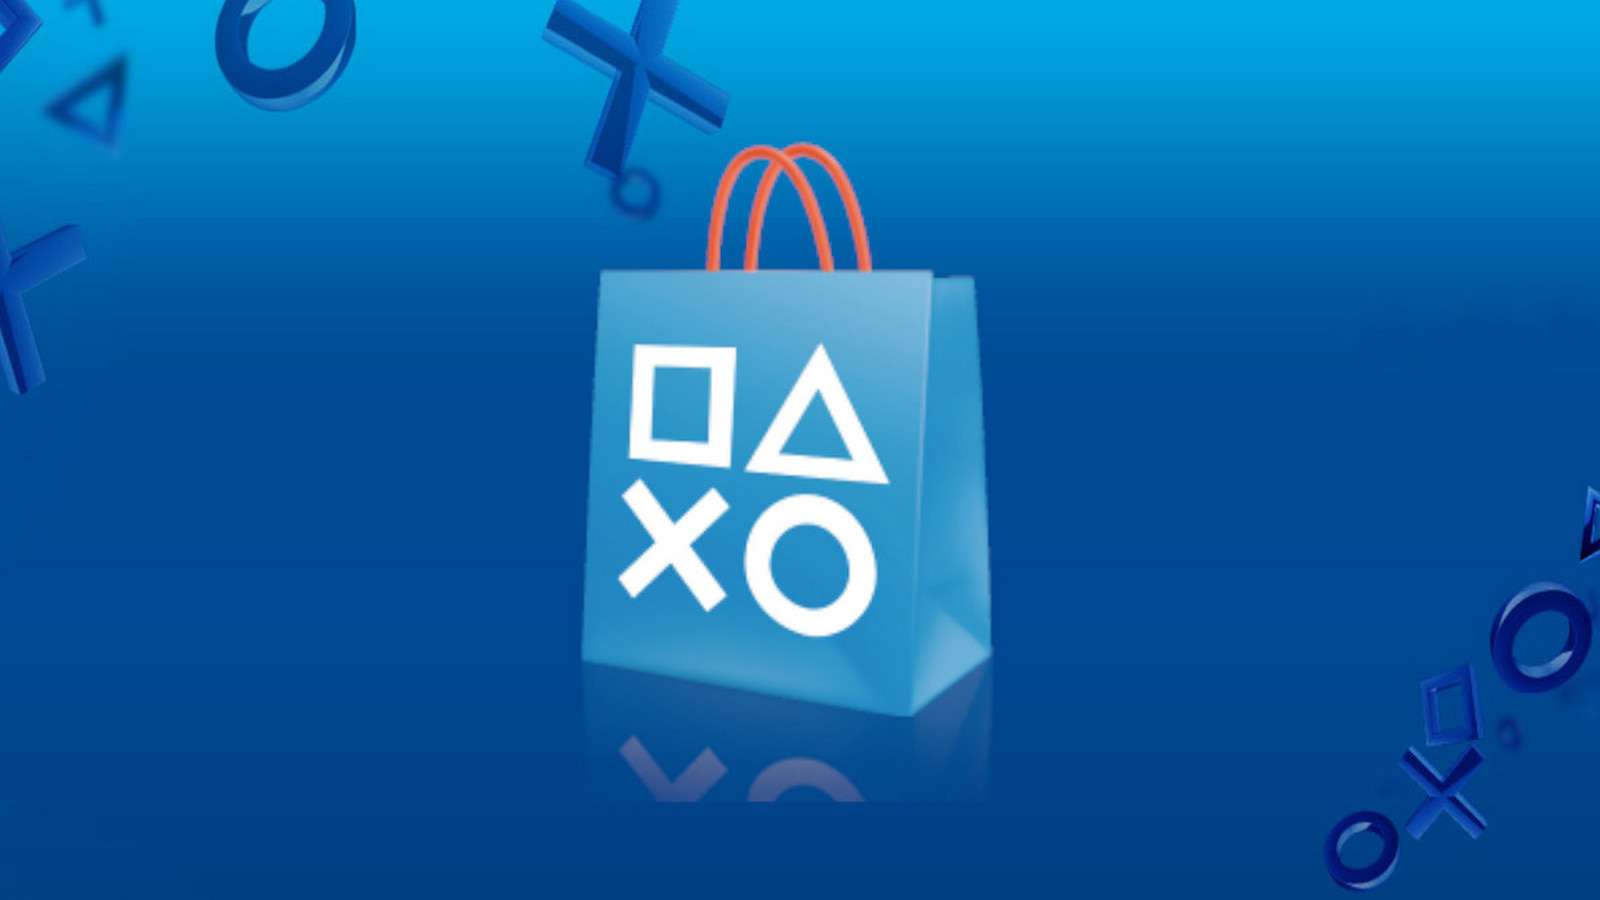 The PlayStation Store logo & banner